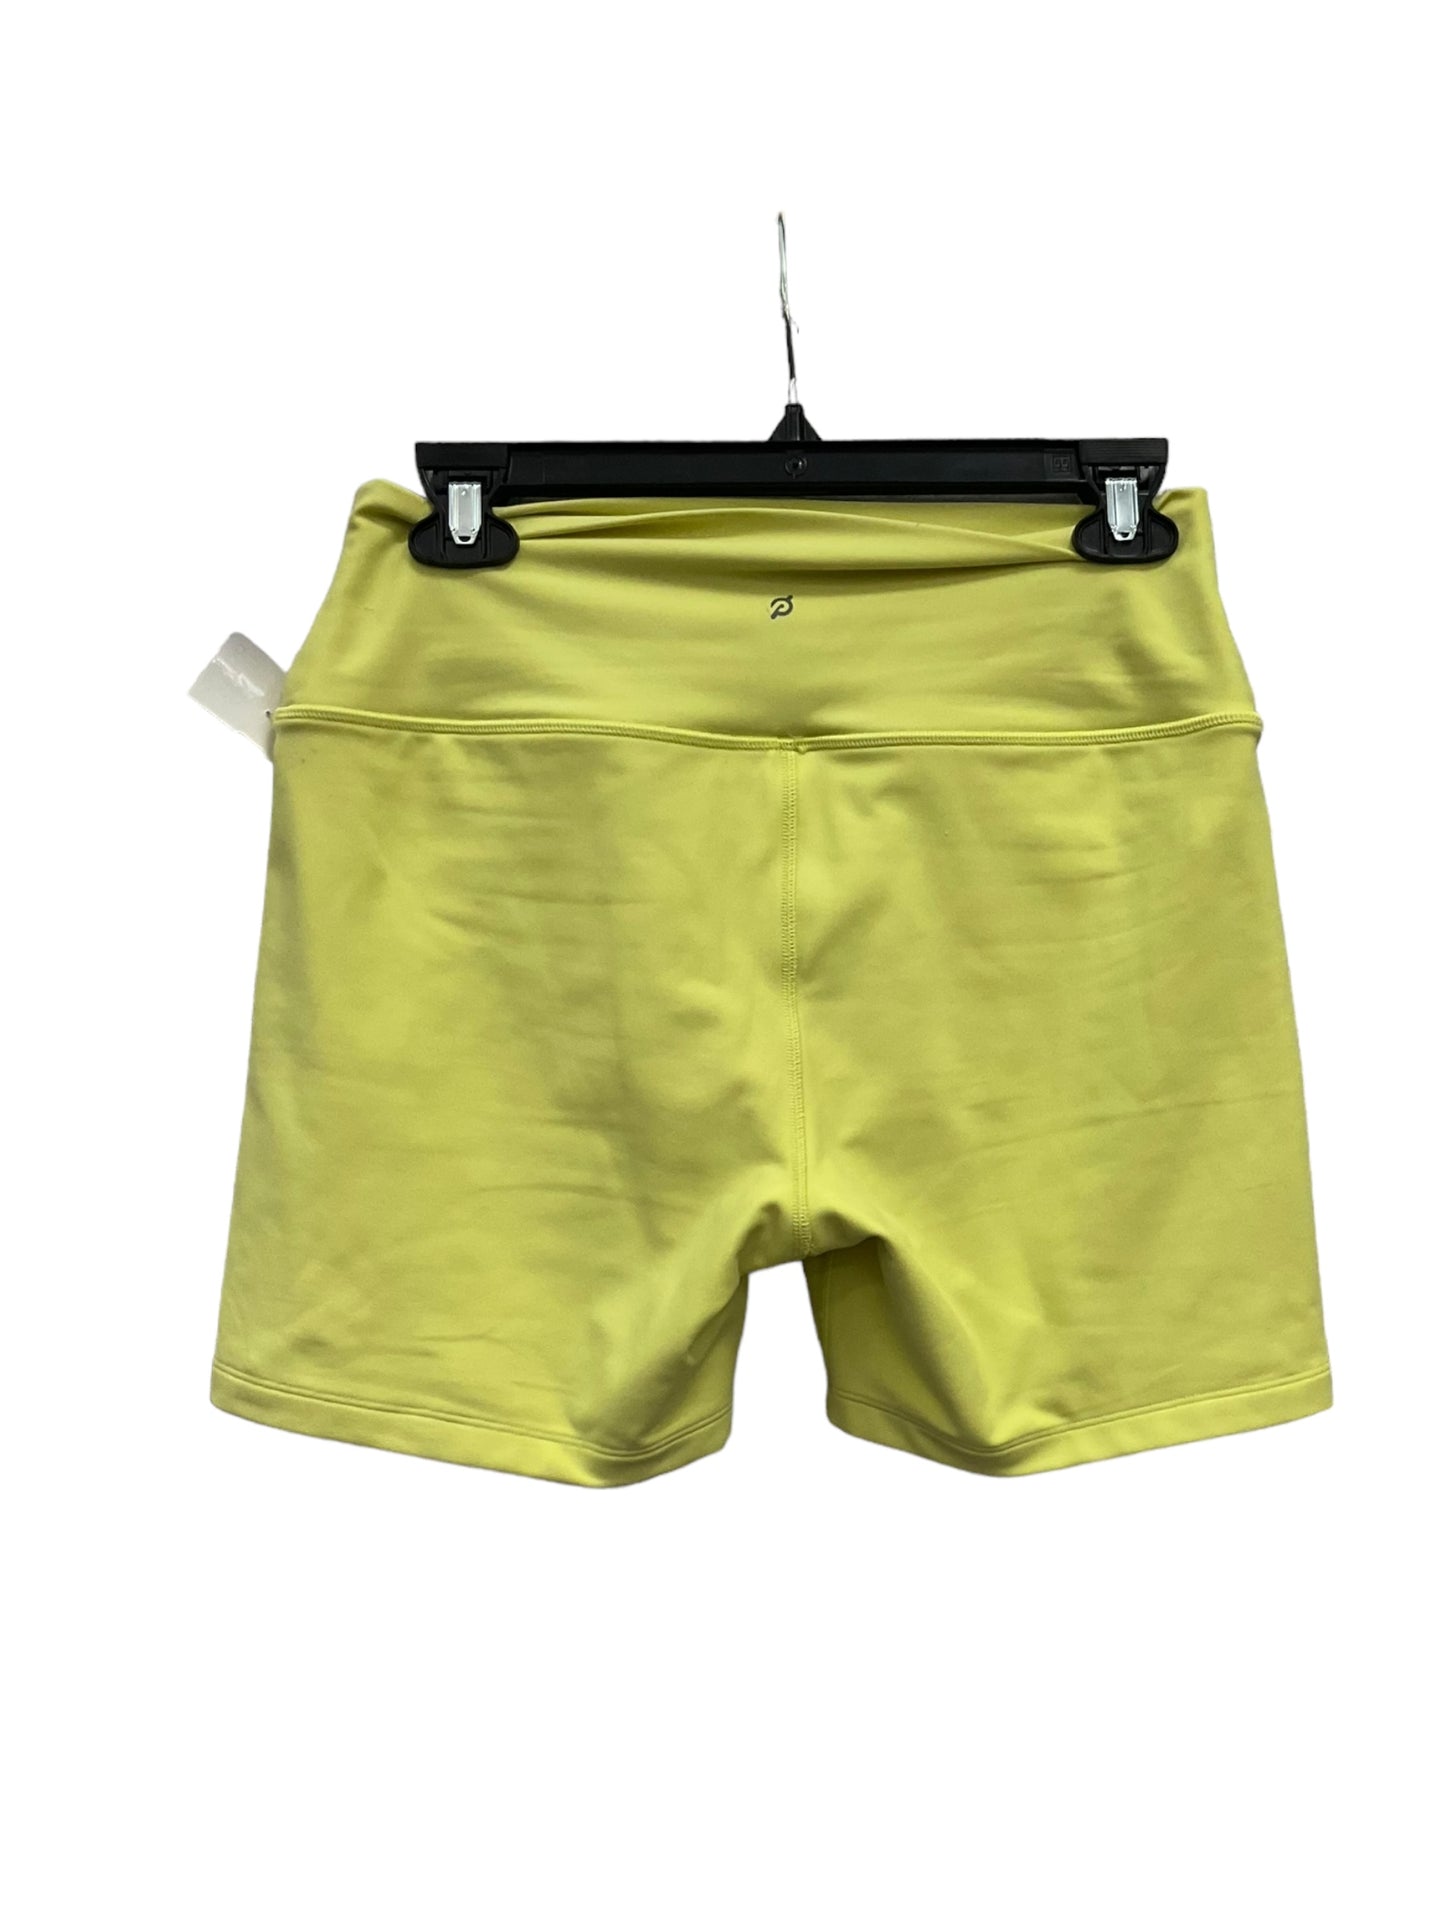 Athletic Shorts By Cmc  Size: M